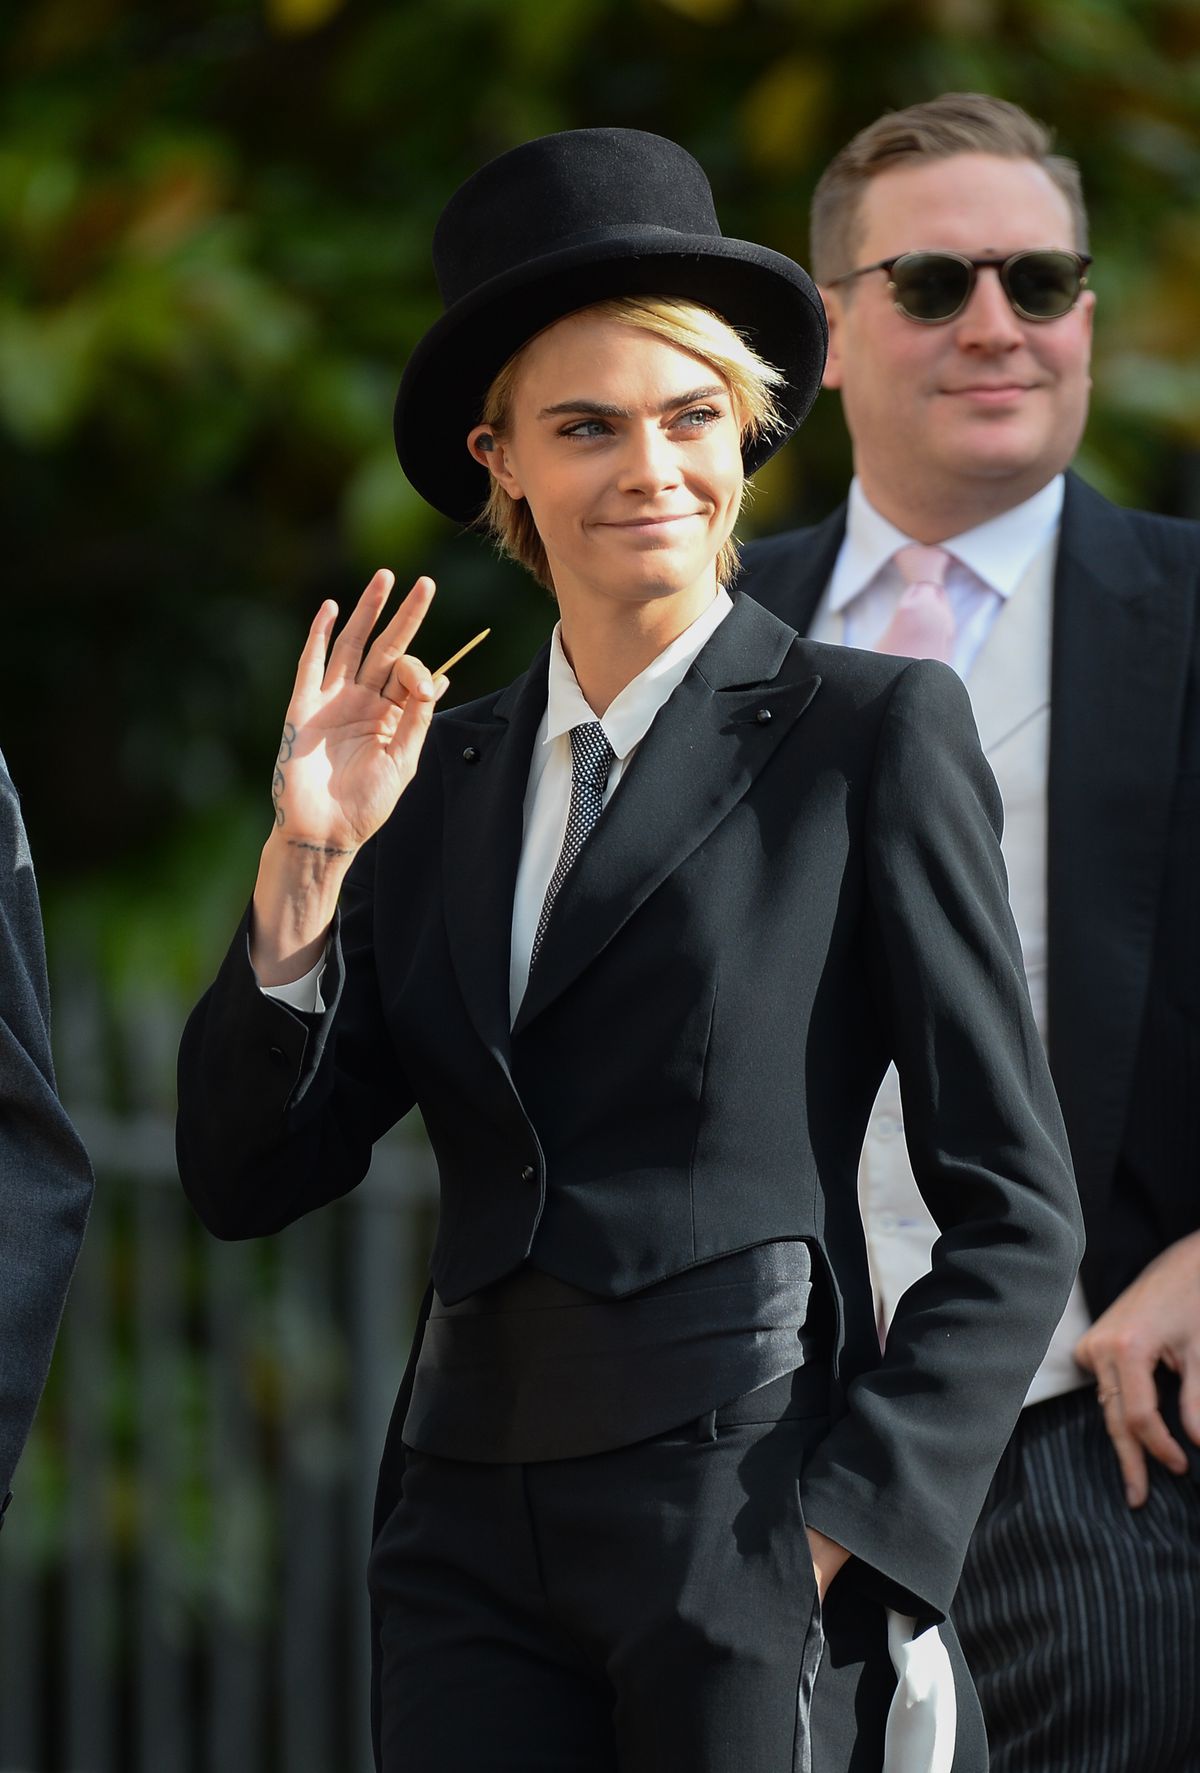 Cara Delevingne waves to someone, toothpick in hand.